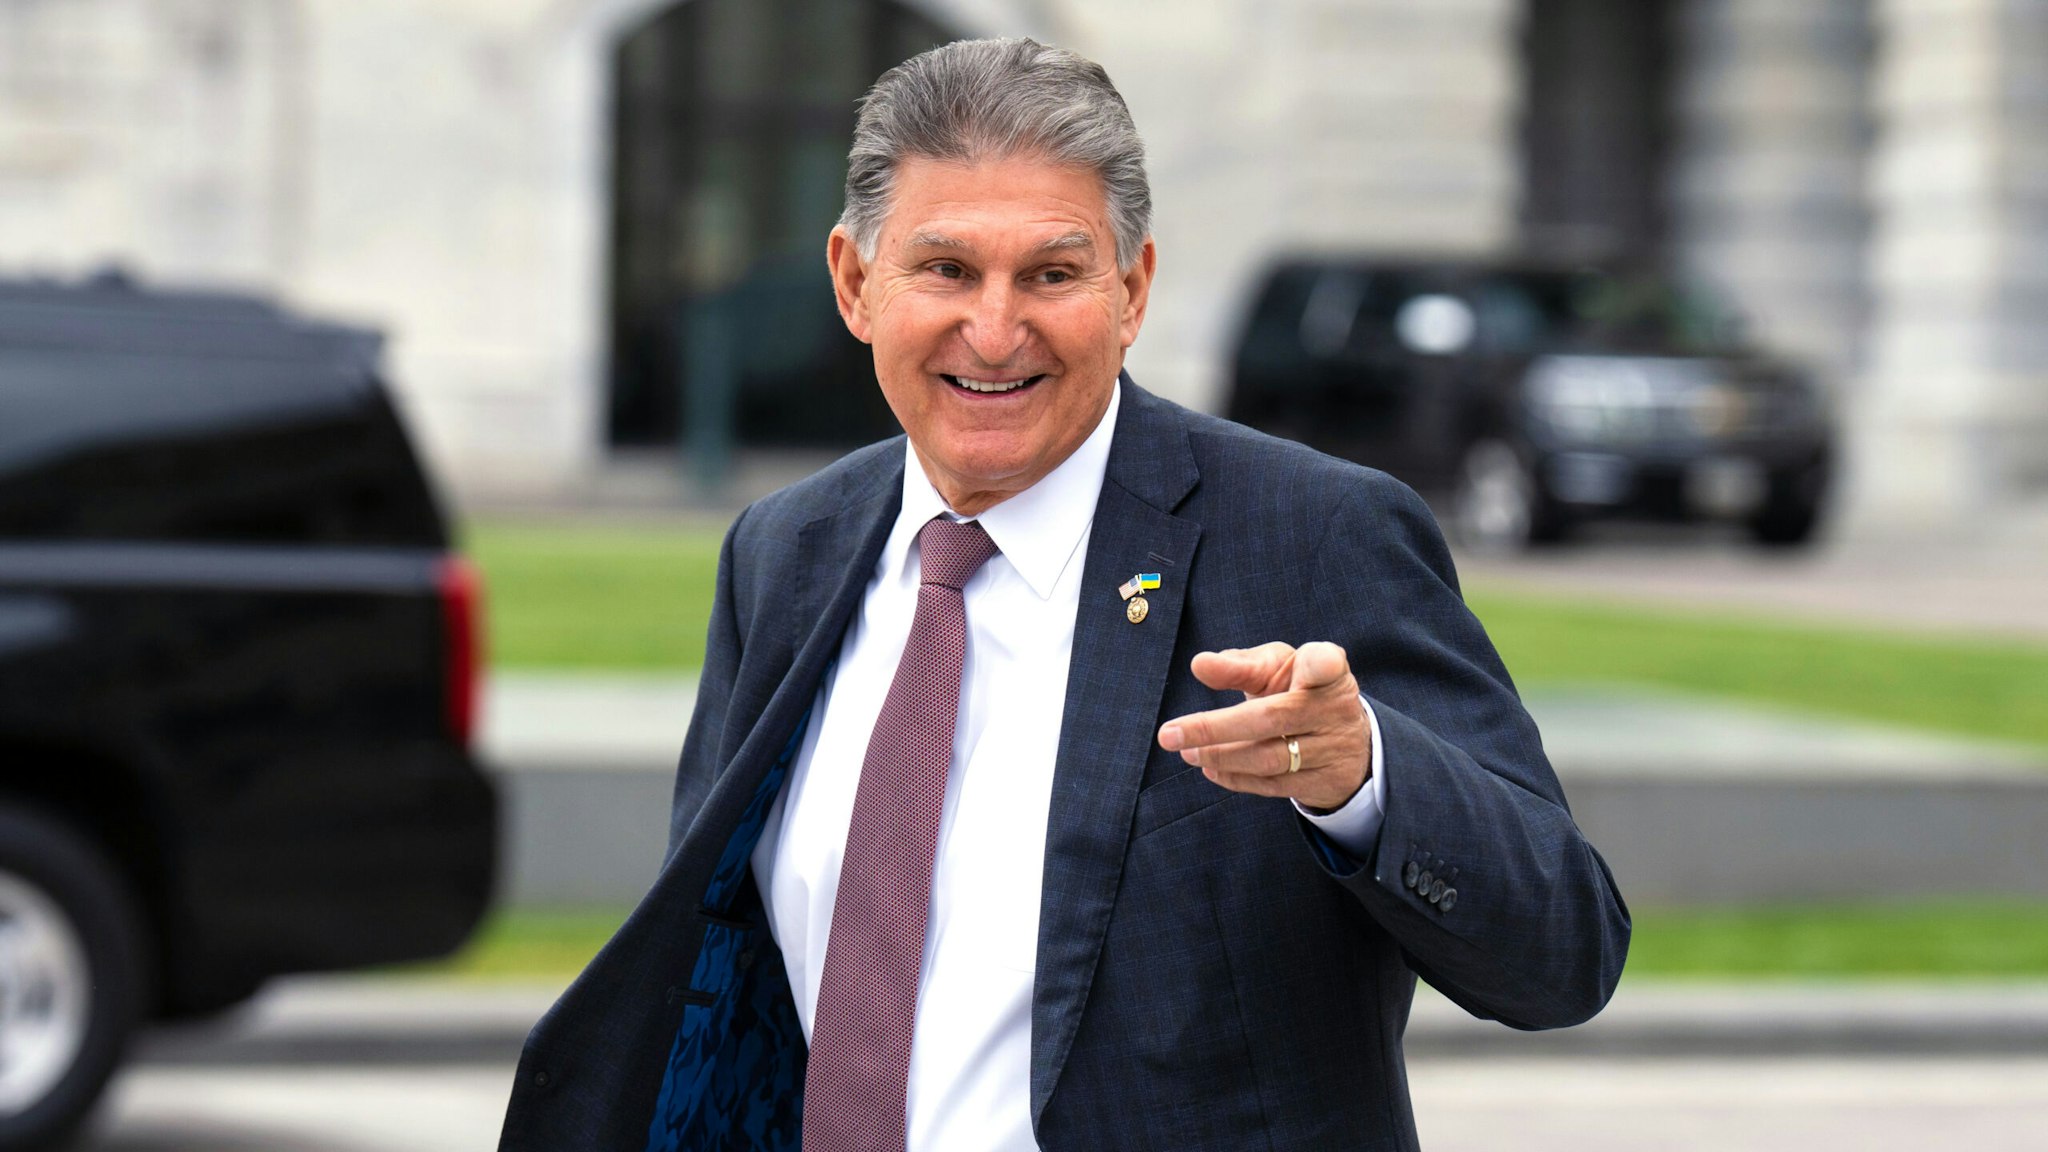 WASHINGTON - MAY 4: Sen. Joe Manchin, D-W. Va., waves to visitors on the Senate steps as he leaves the Capitol after the last vote of the week in Washington on Thurssday, May 4, 2023.